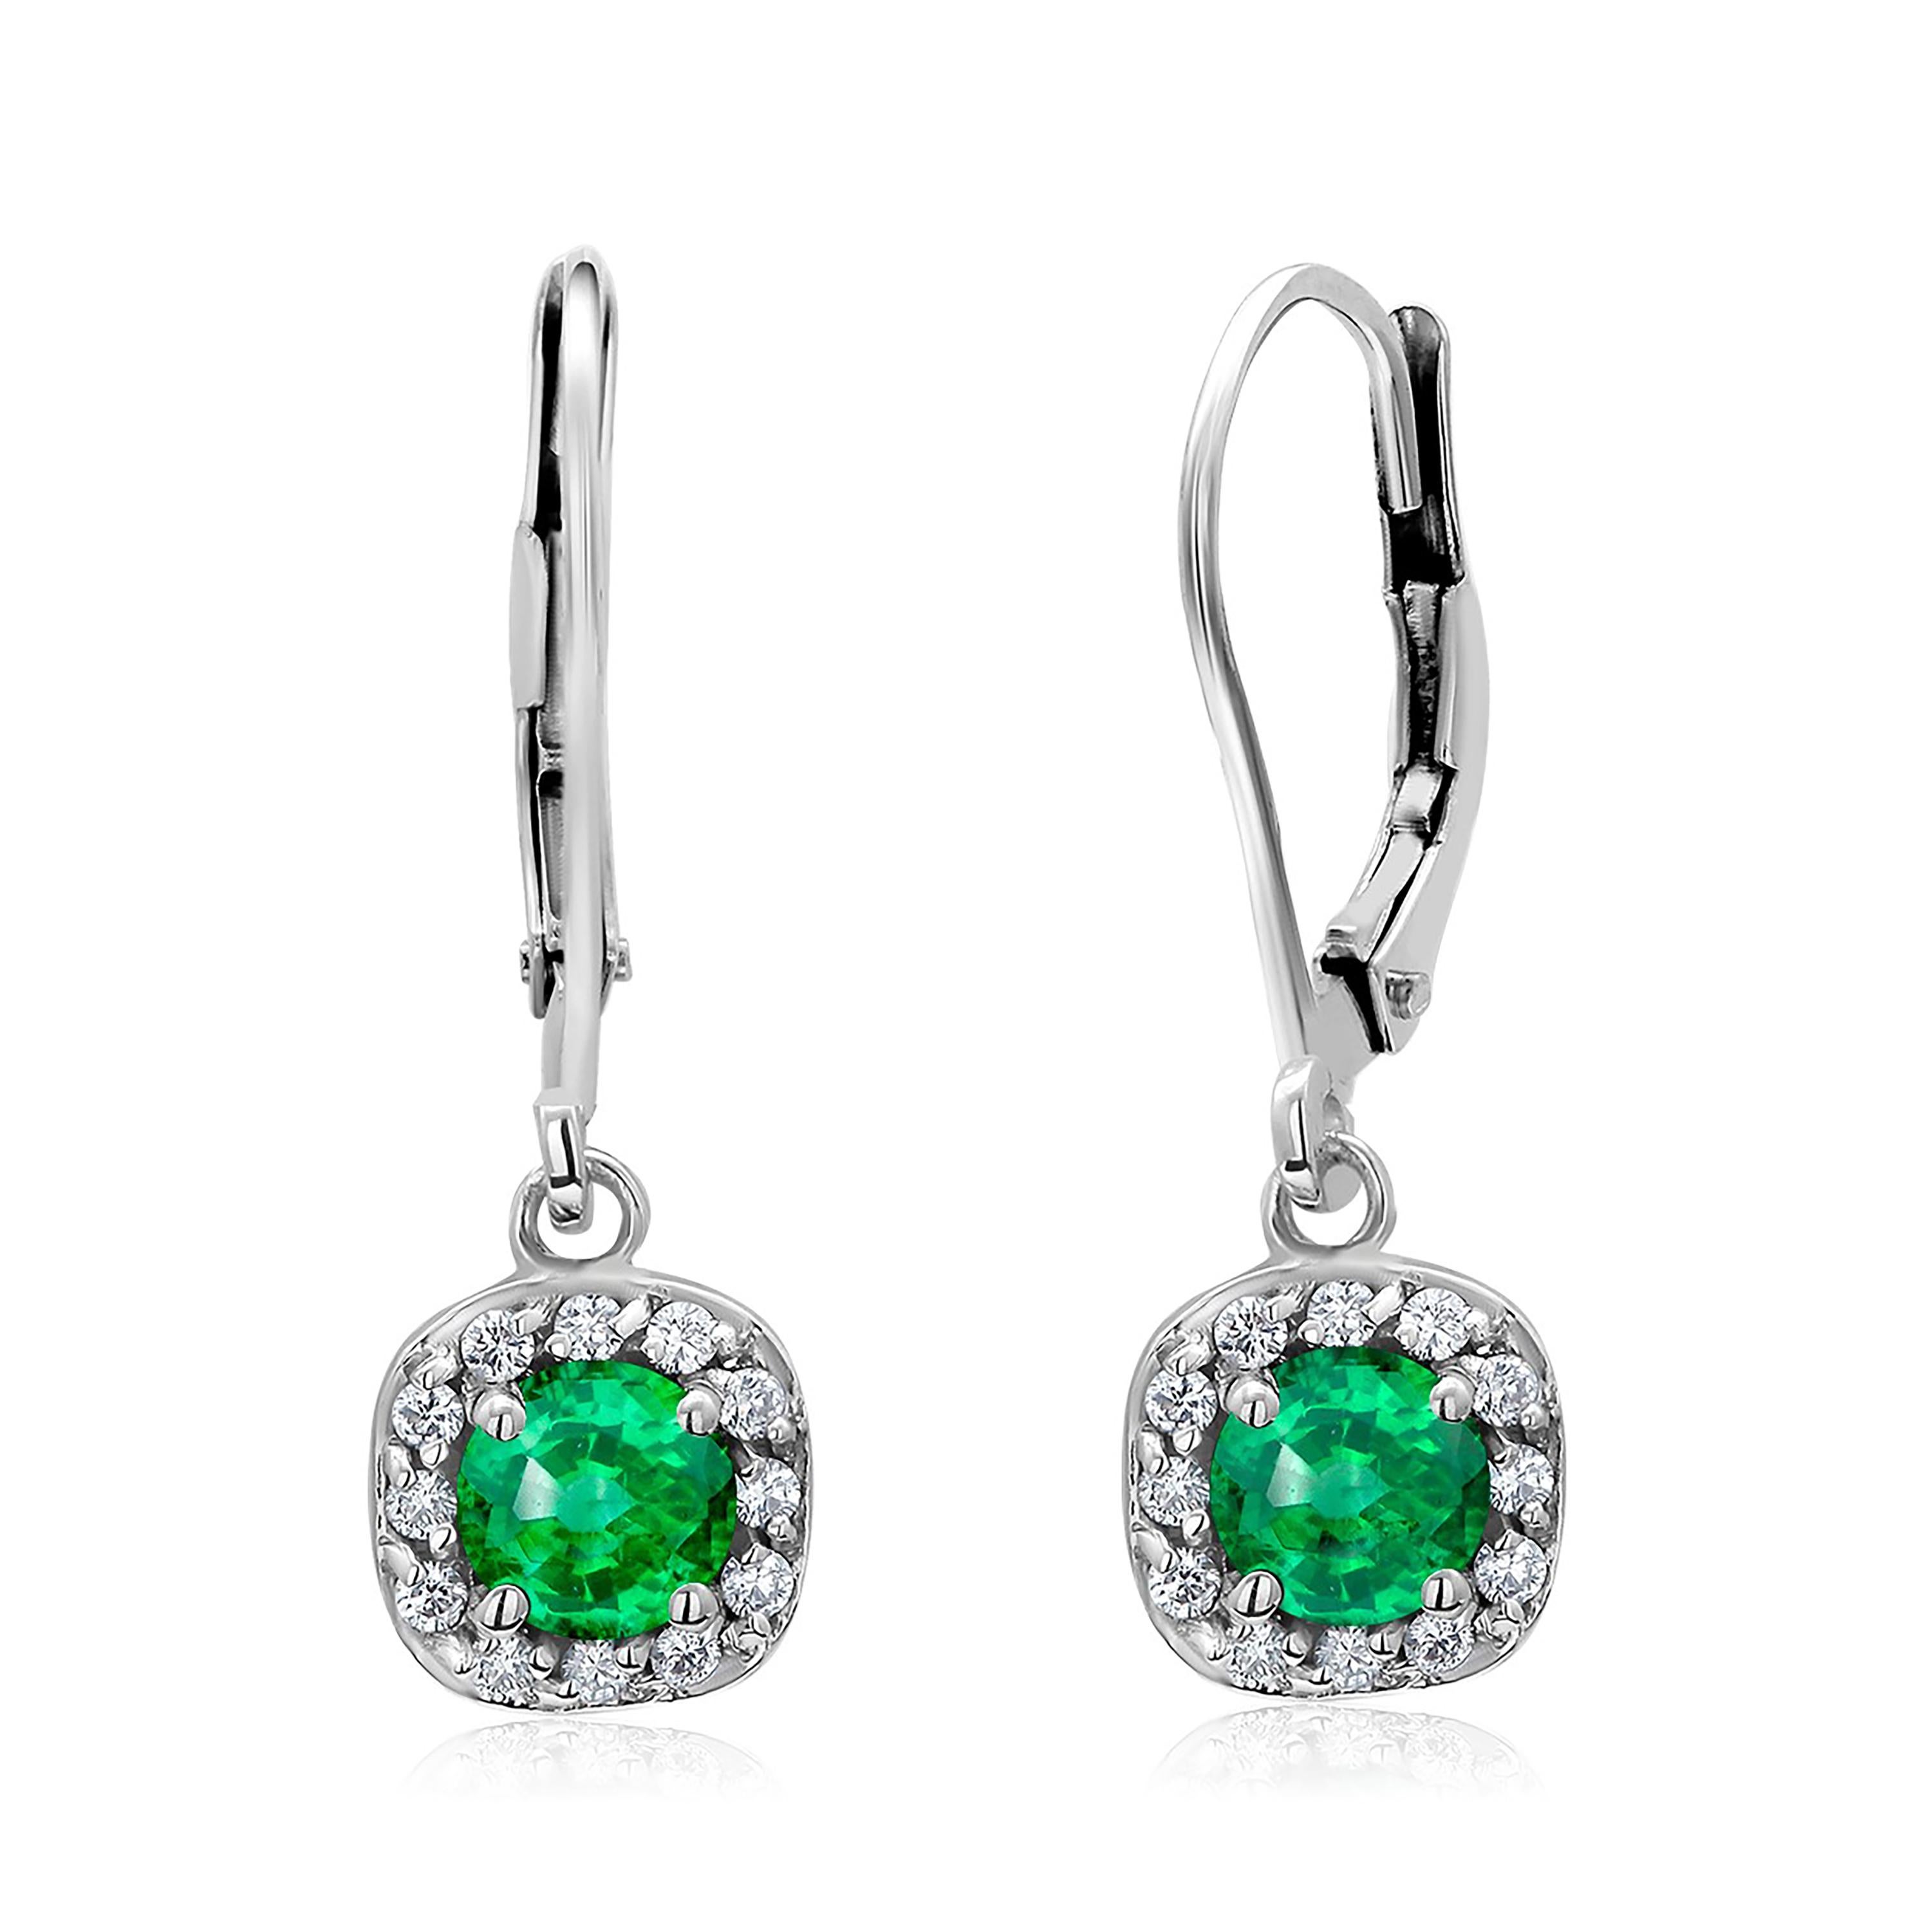 Contemporary Diamond and Emerald White Gold Square Shape Lever Back Hoop Earrings